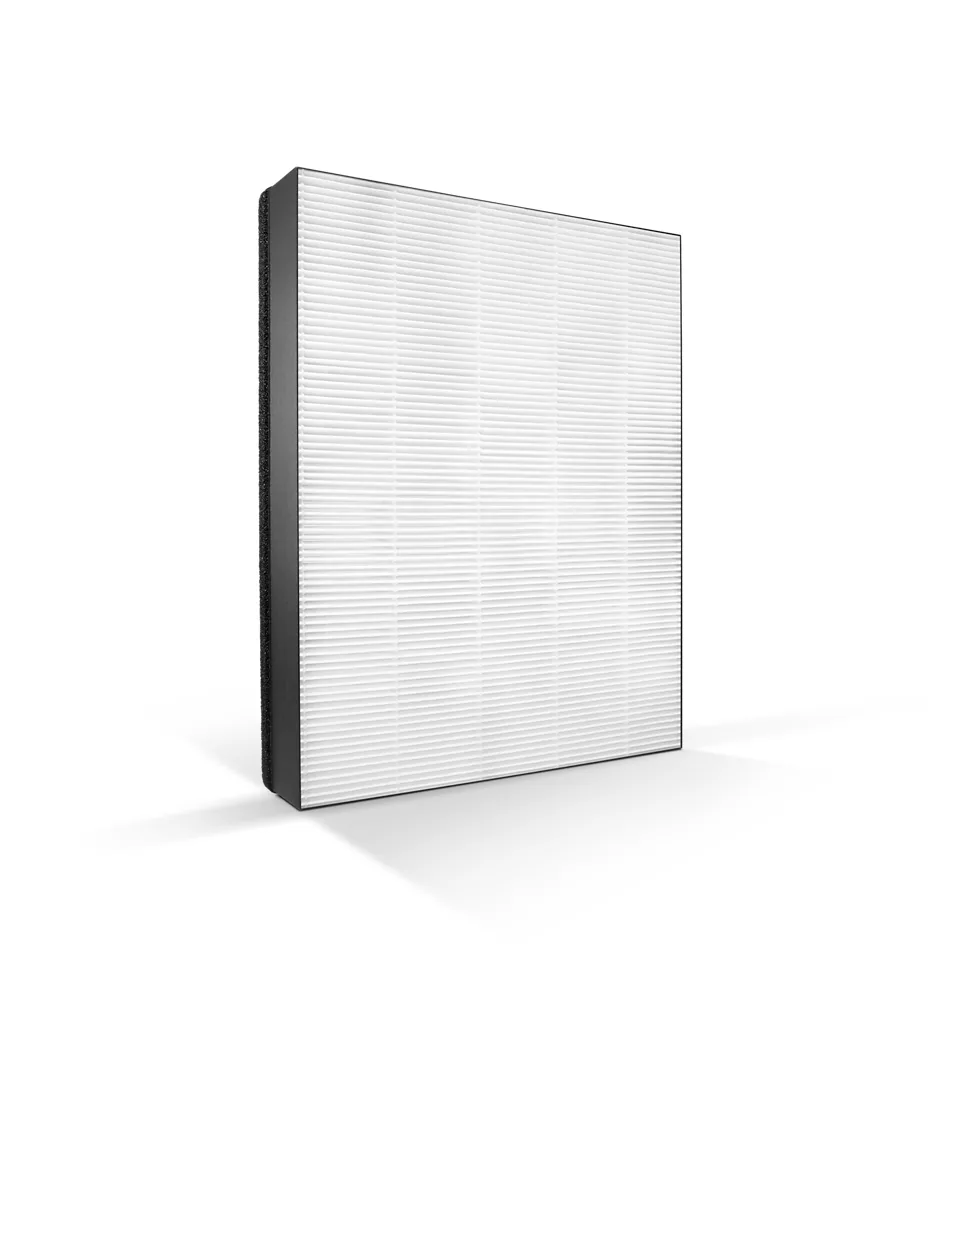 Philips NanoProtect HEPA filter AC4124 for Air Purifier Model AC4012